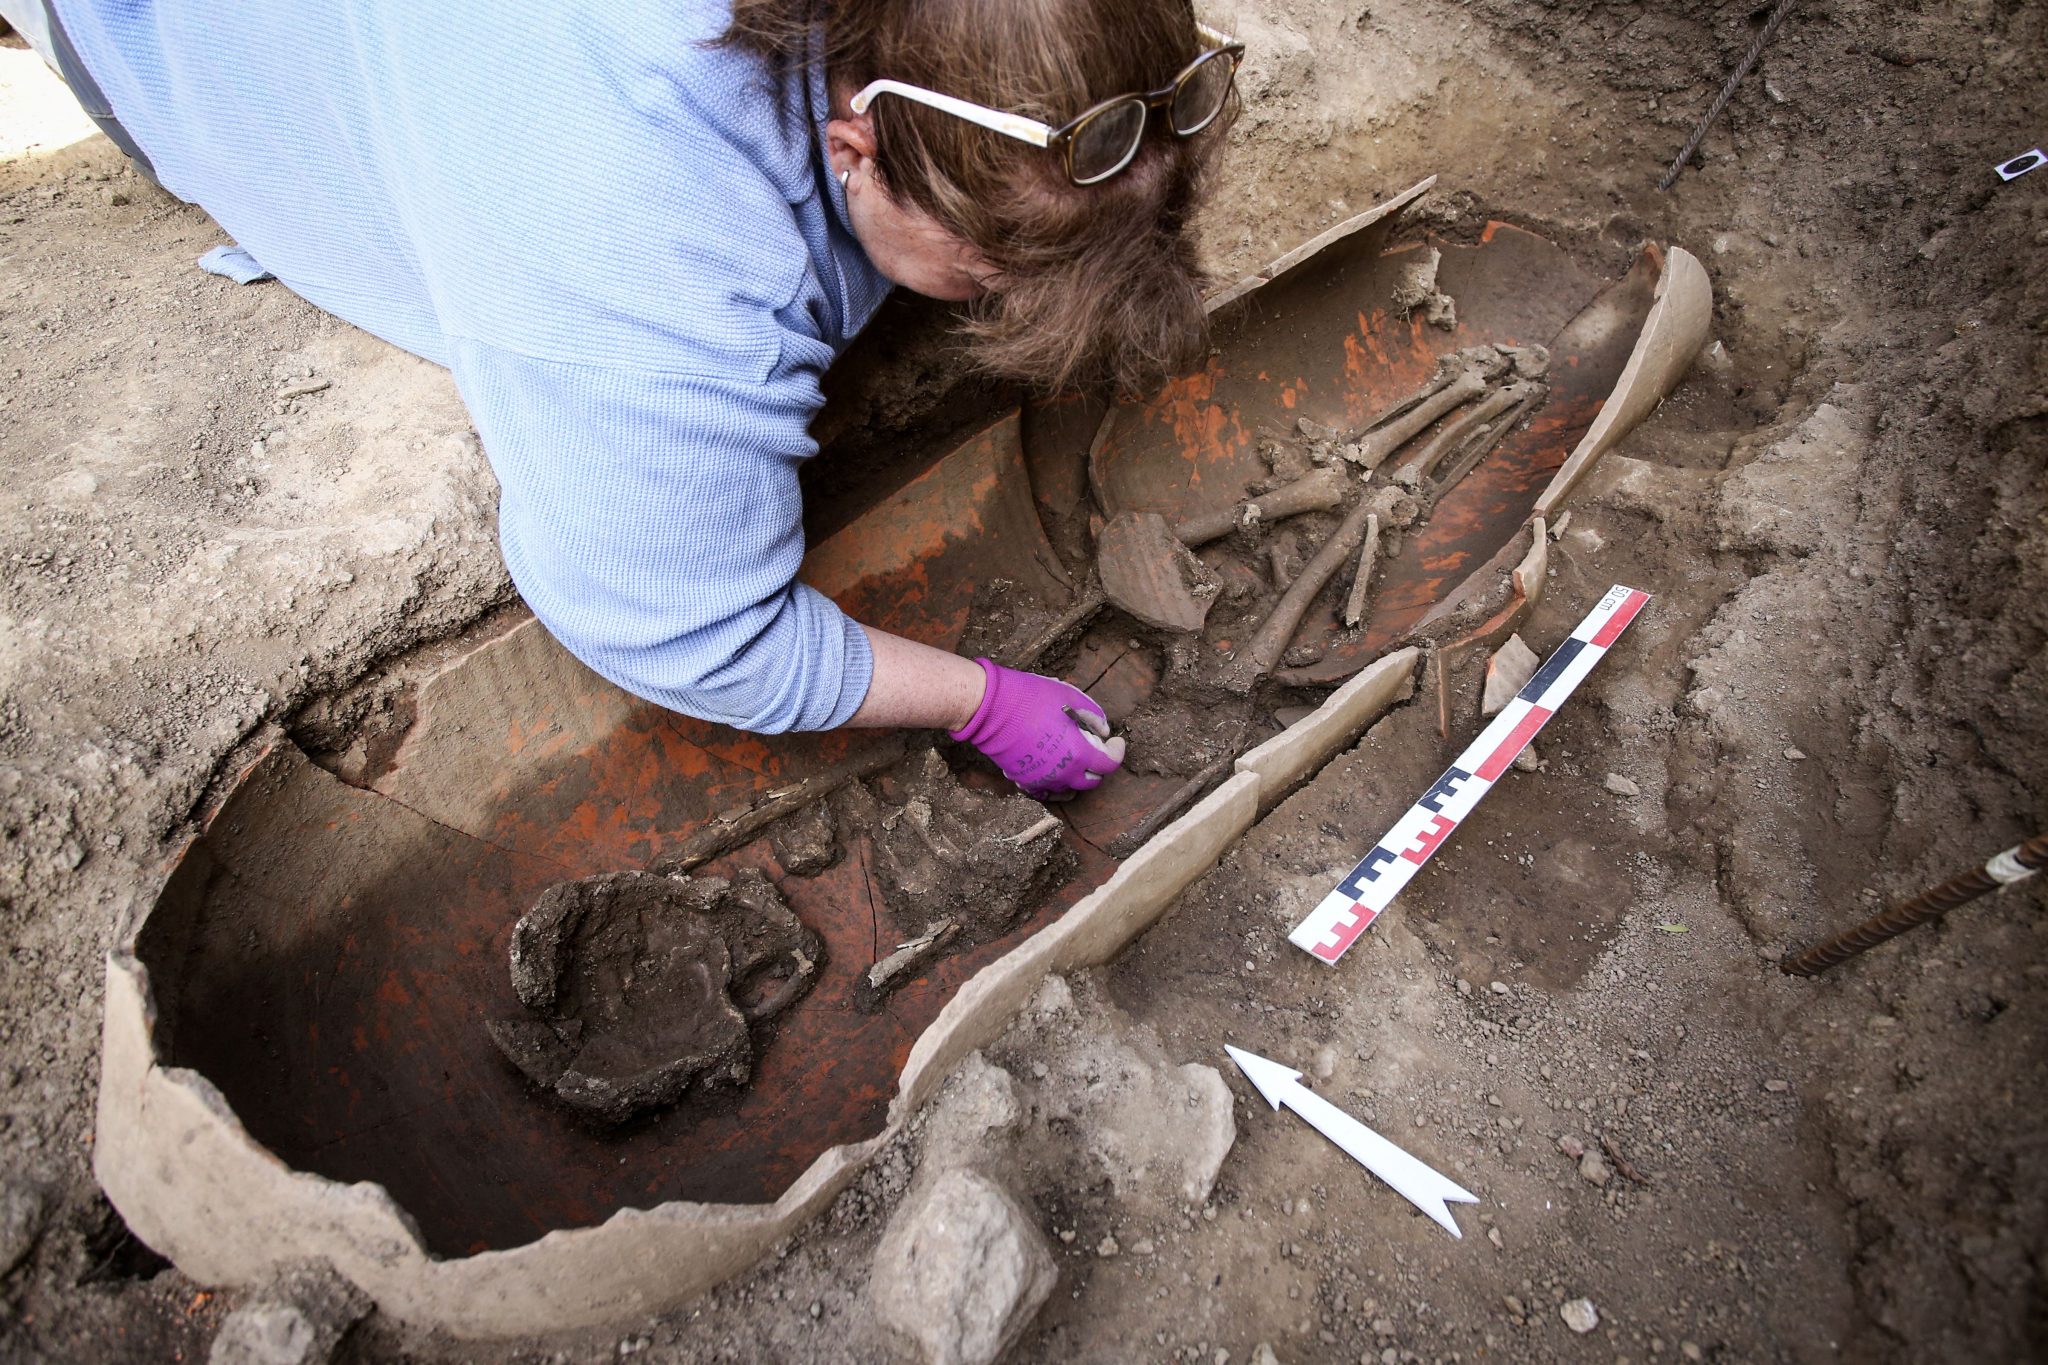 An archaeologist excavating the necropolis discovered in Ile Rousse, in Corsica (Photo Credit: PASCAL POCHARD-CASABIANCA/AFP via Getty Images)